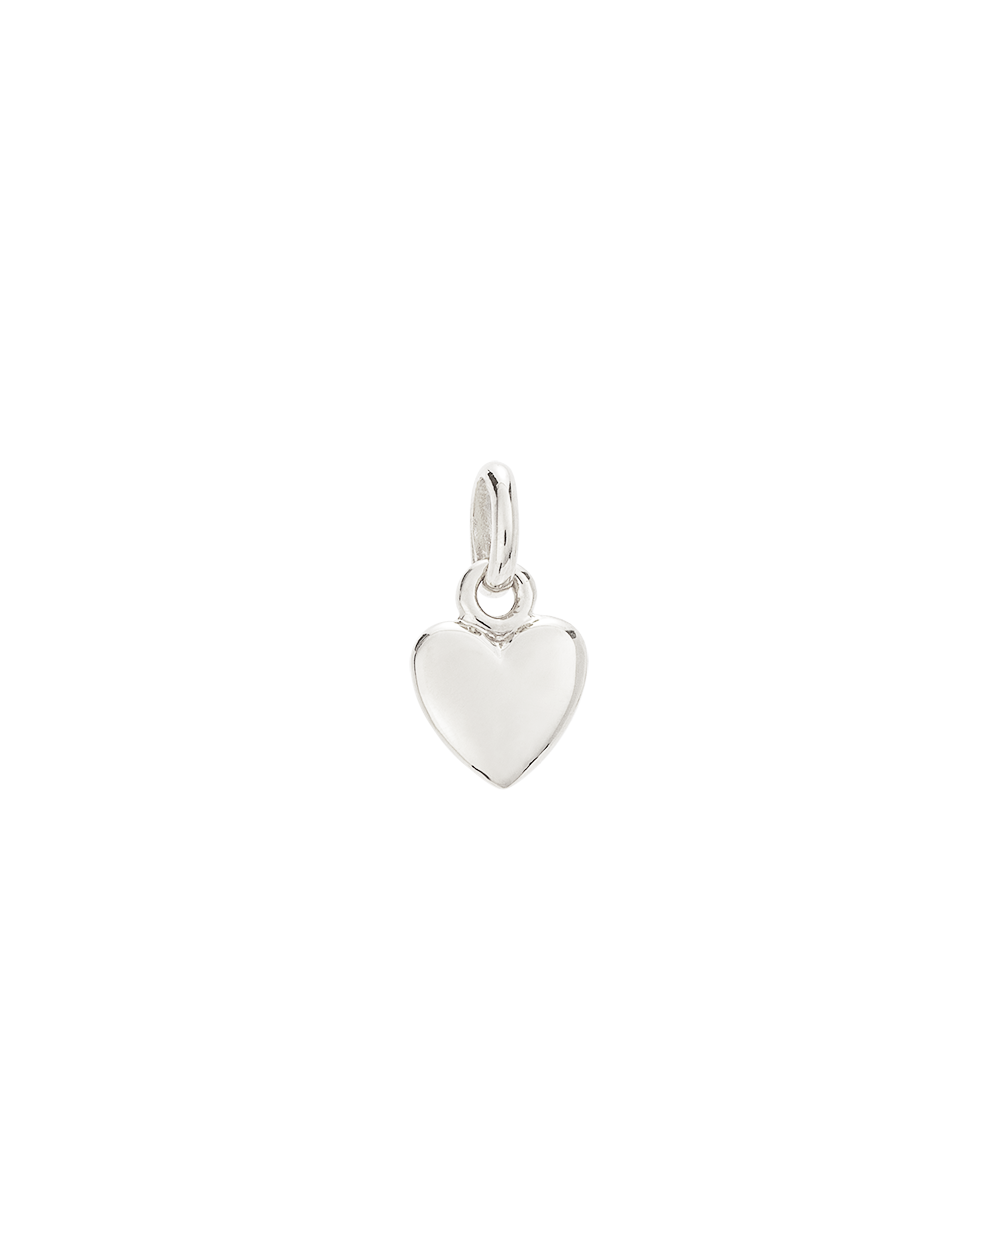 HEART CHARM (STERLING SILVER) - IMAGE 1